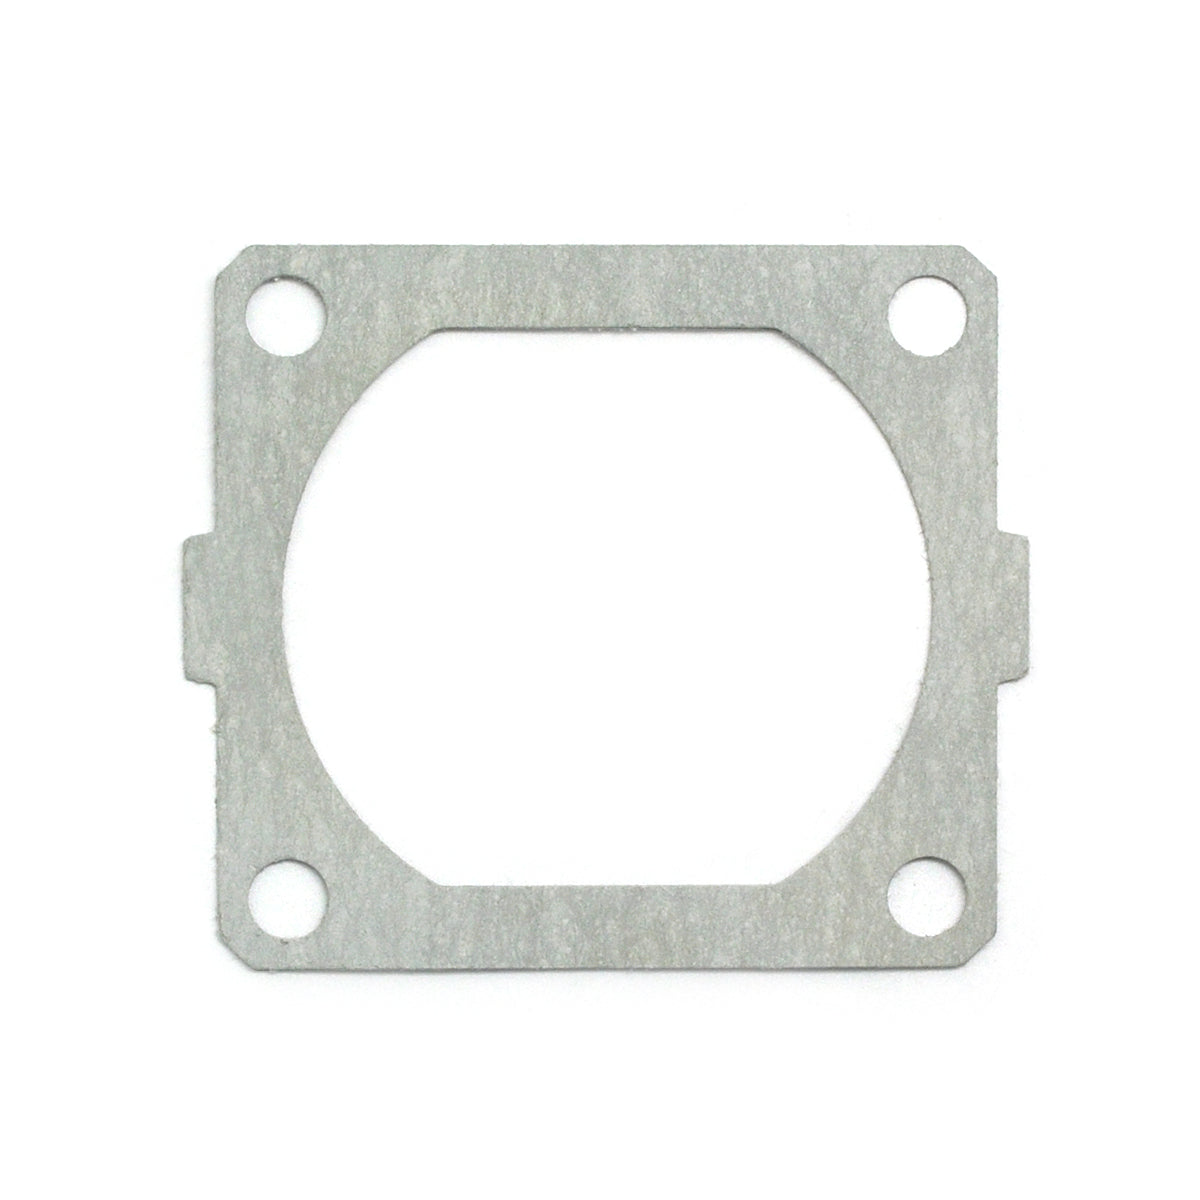 Cylinder Gasket Fit For Stihl MS660 MS640 066 Chainsaw Part OEM 